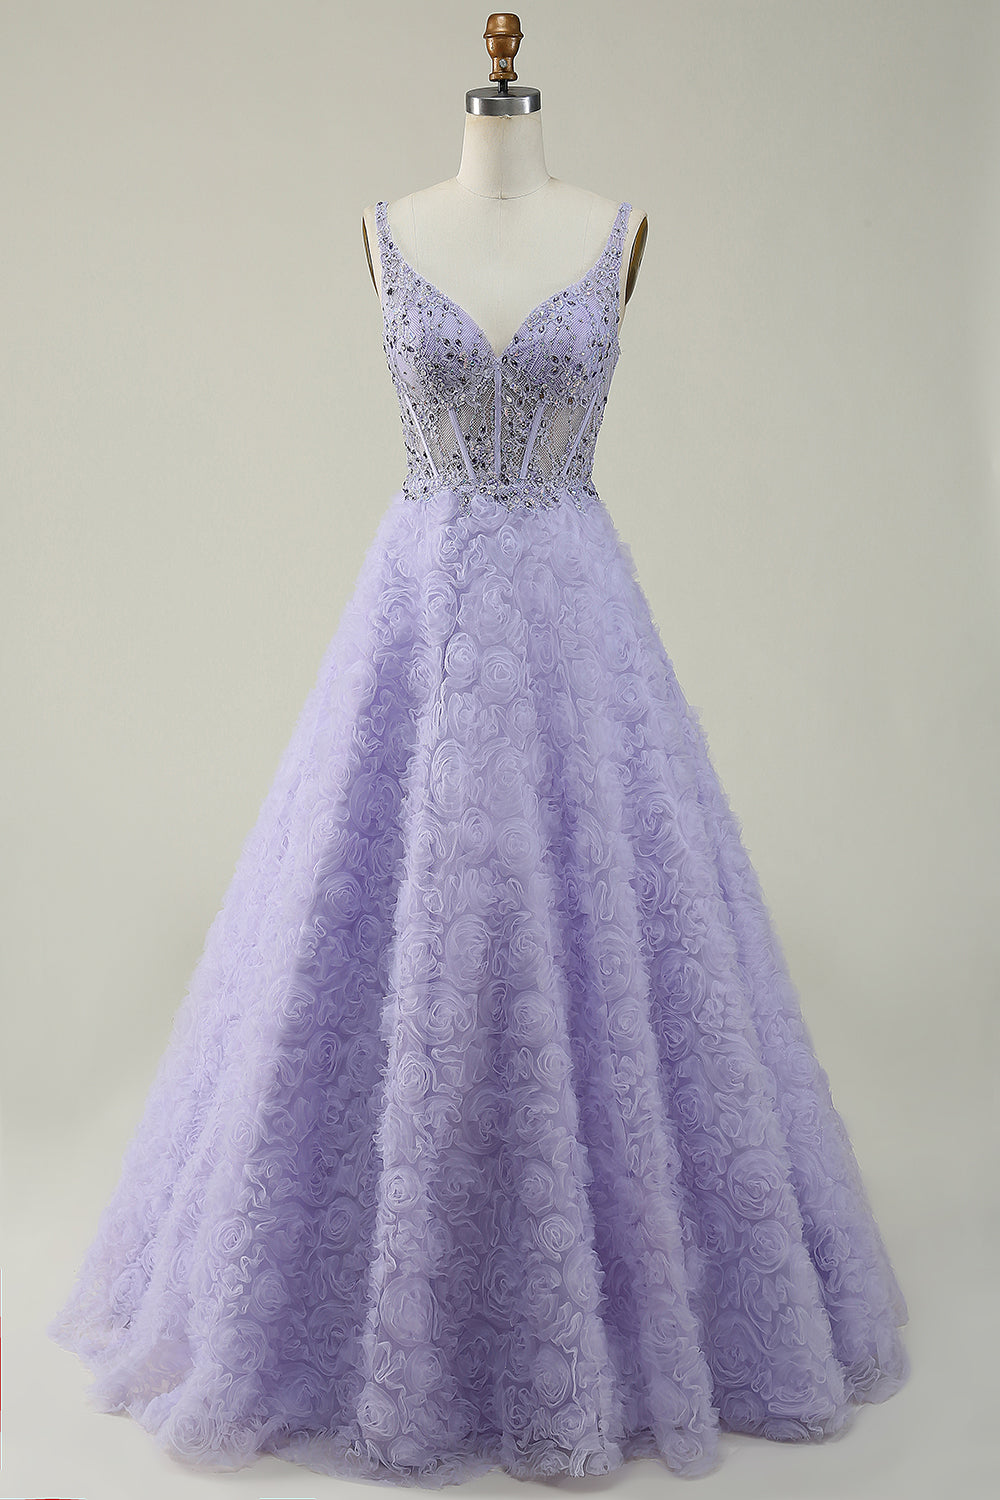 V-Neck Purple Ball Gown Dress with Beading